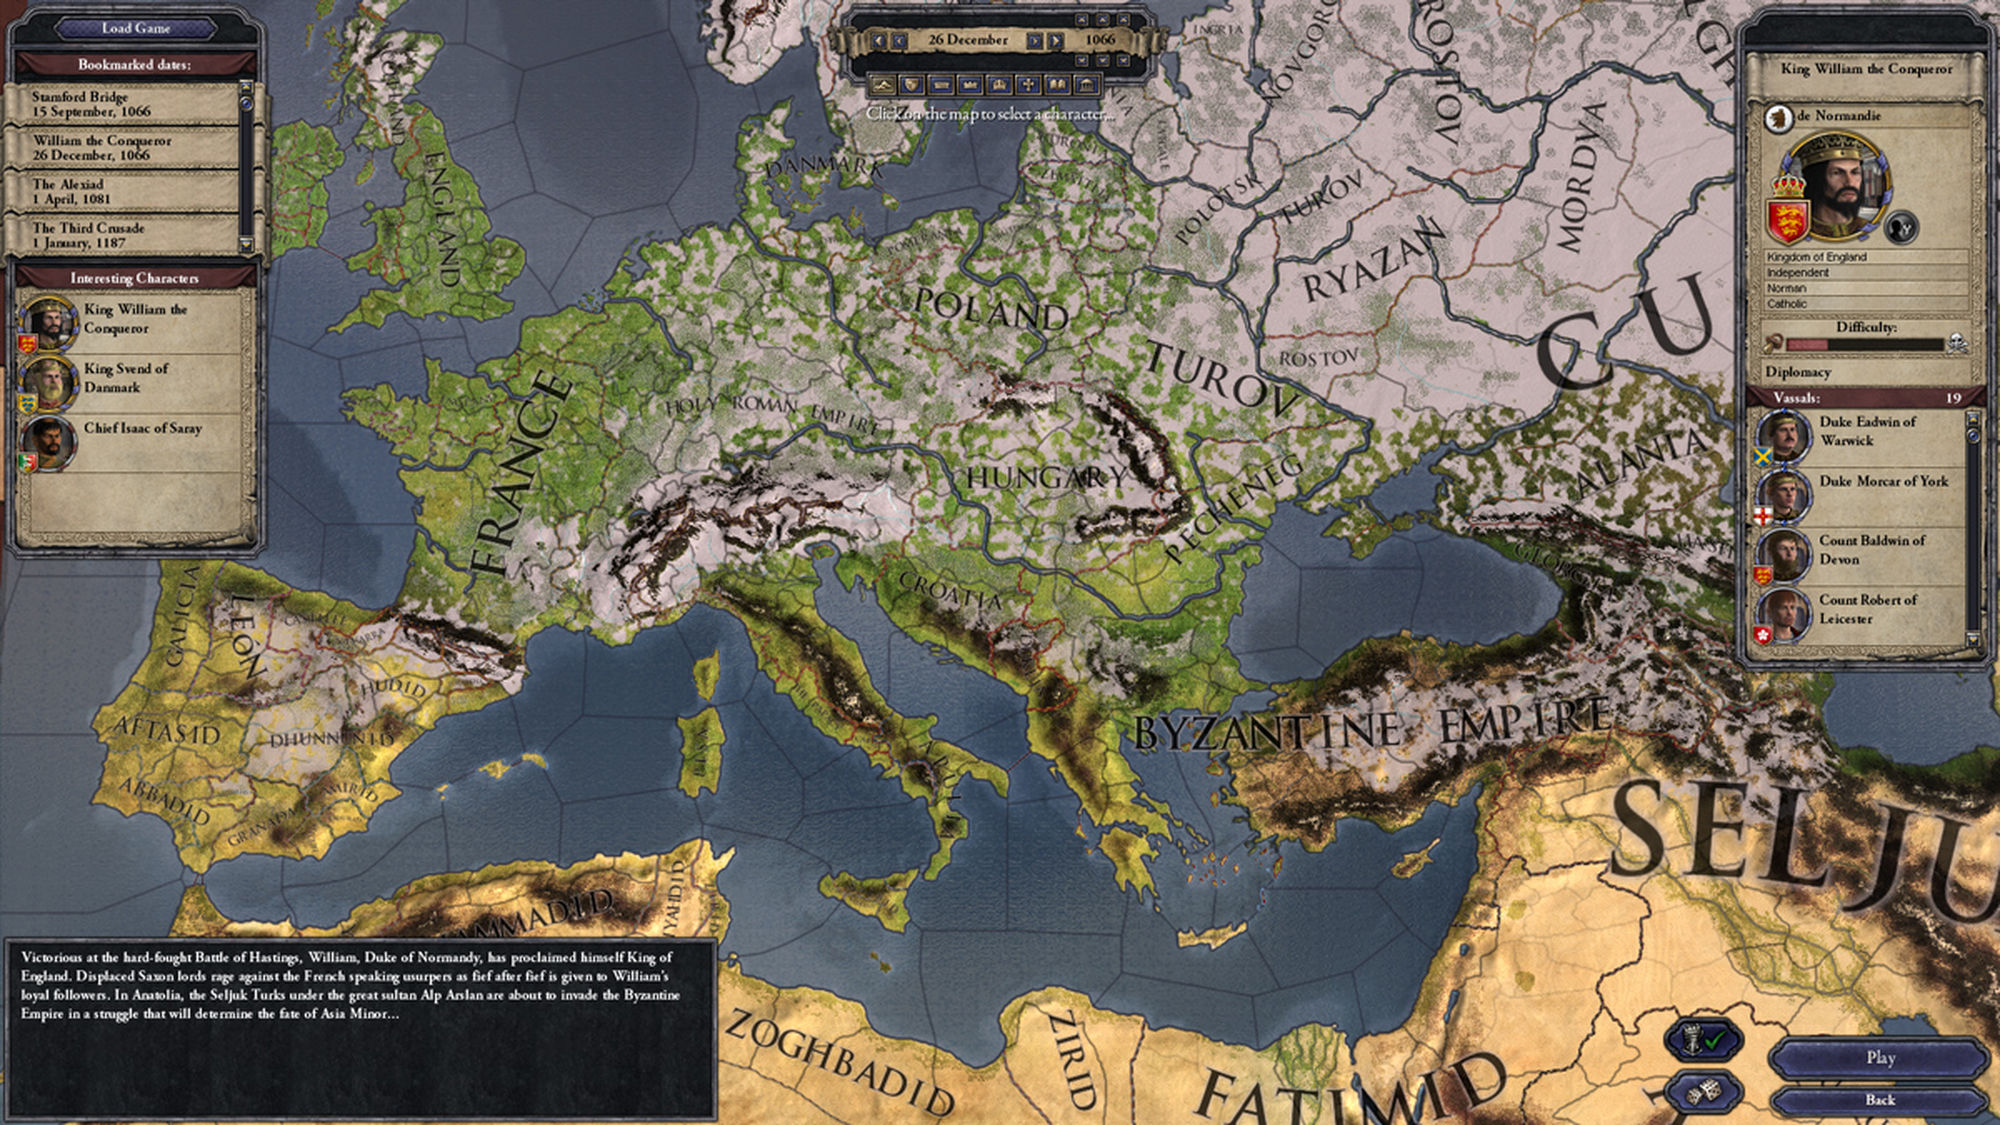 King of Kings: Several historical figures vie for these lands in CK2.